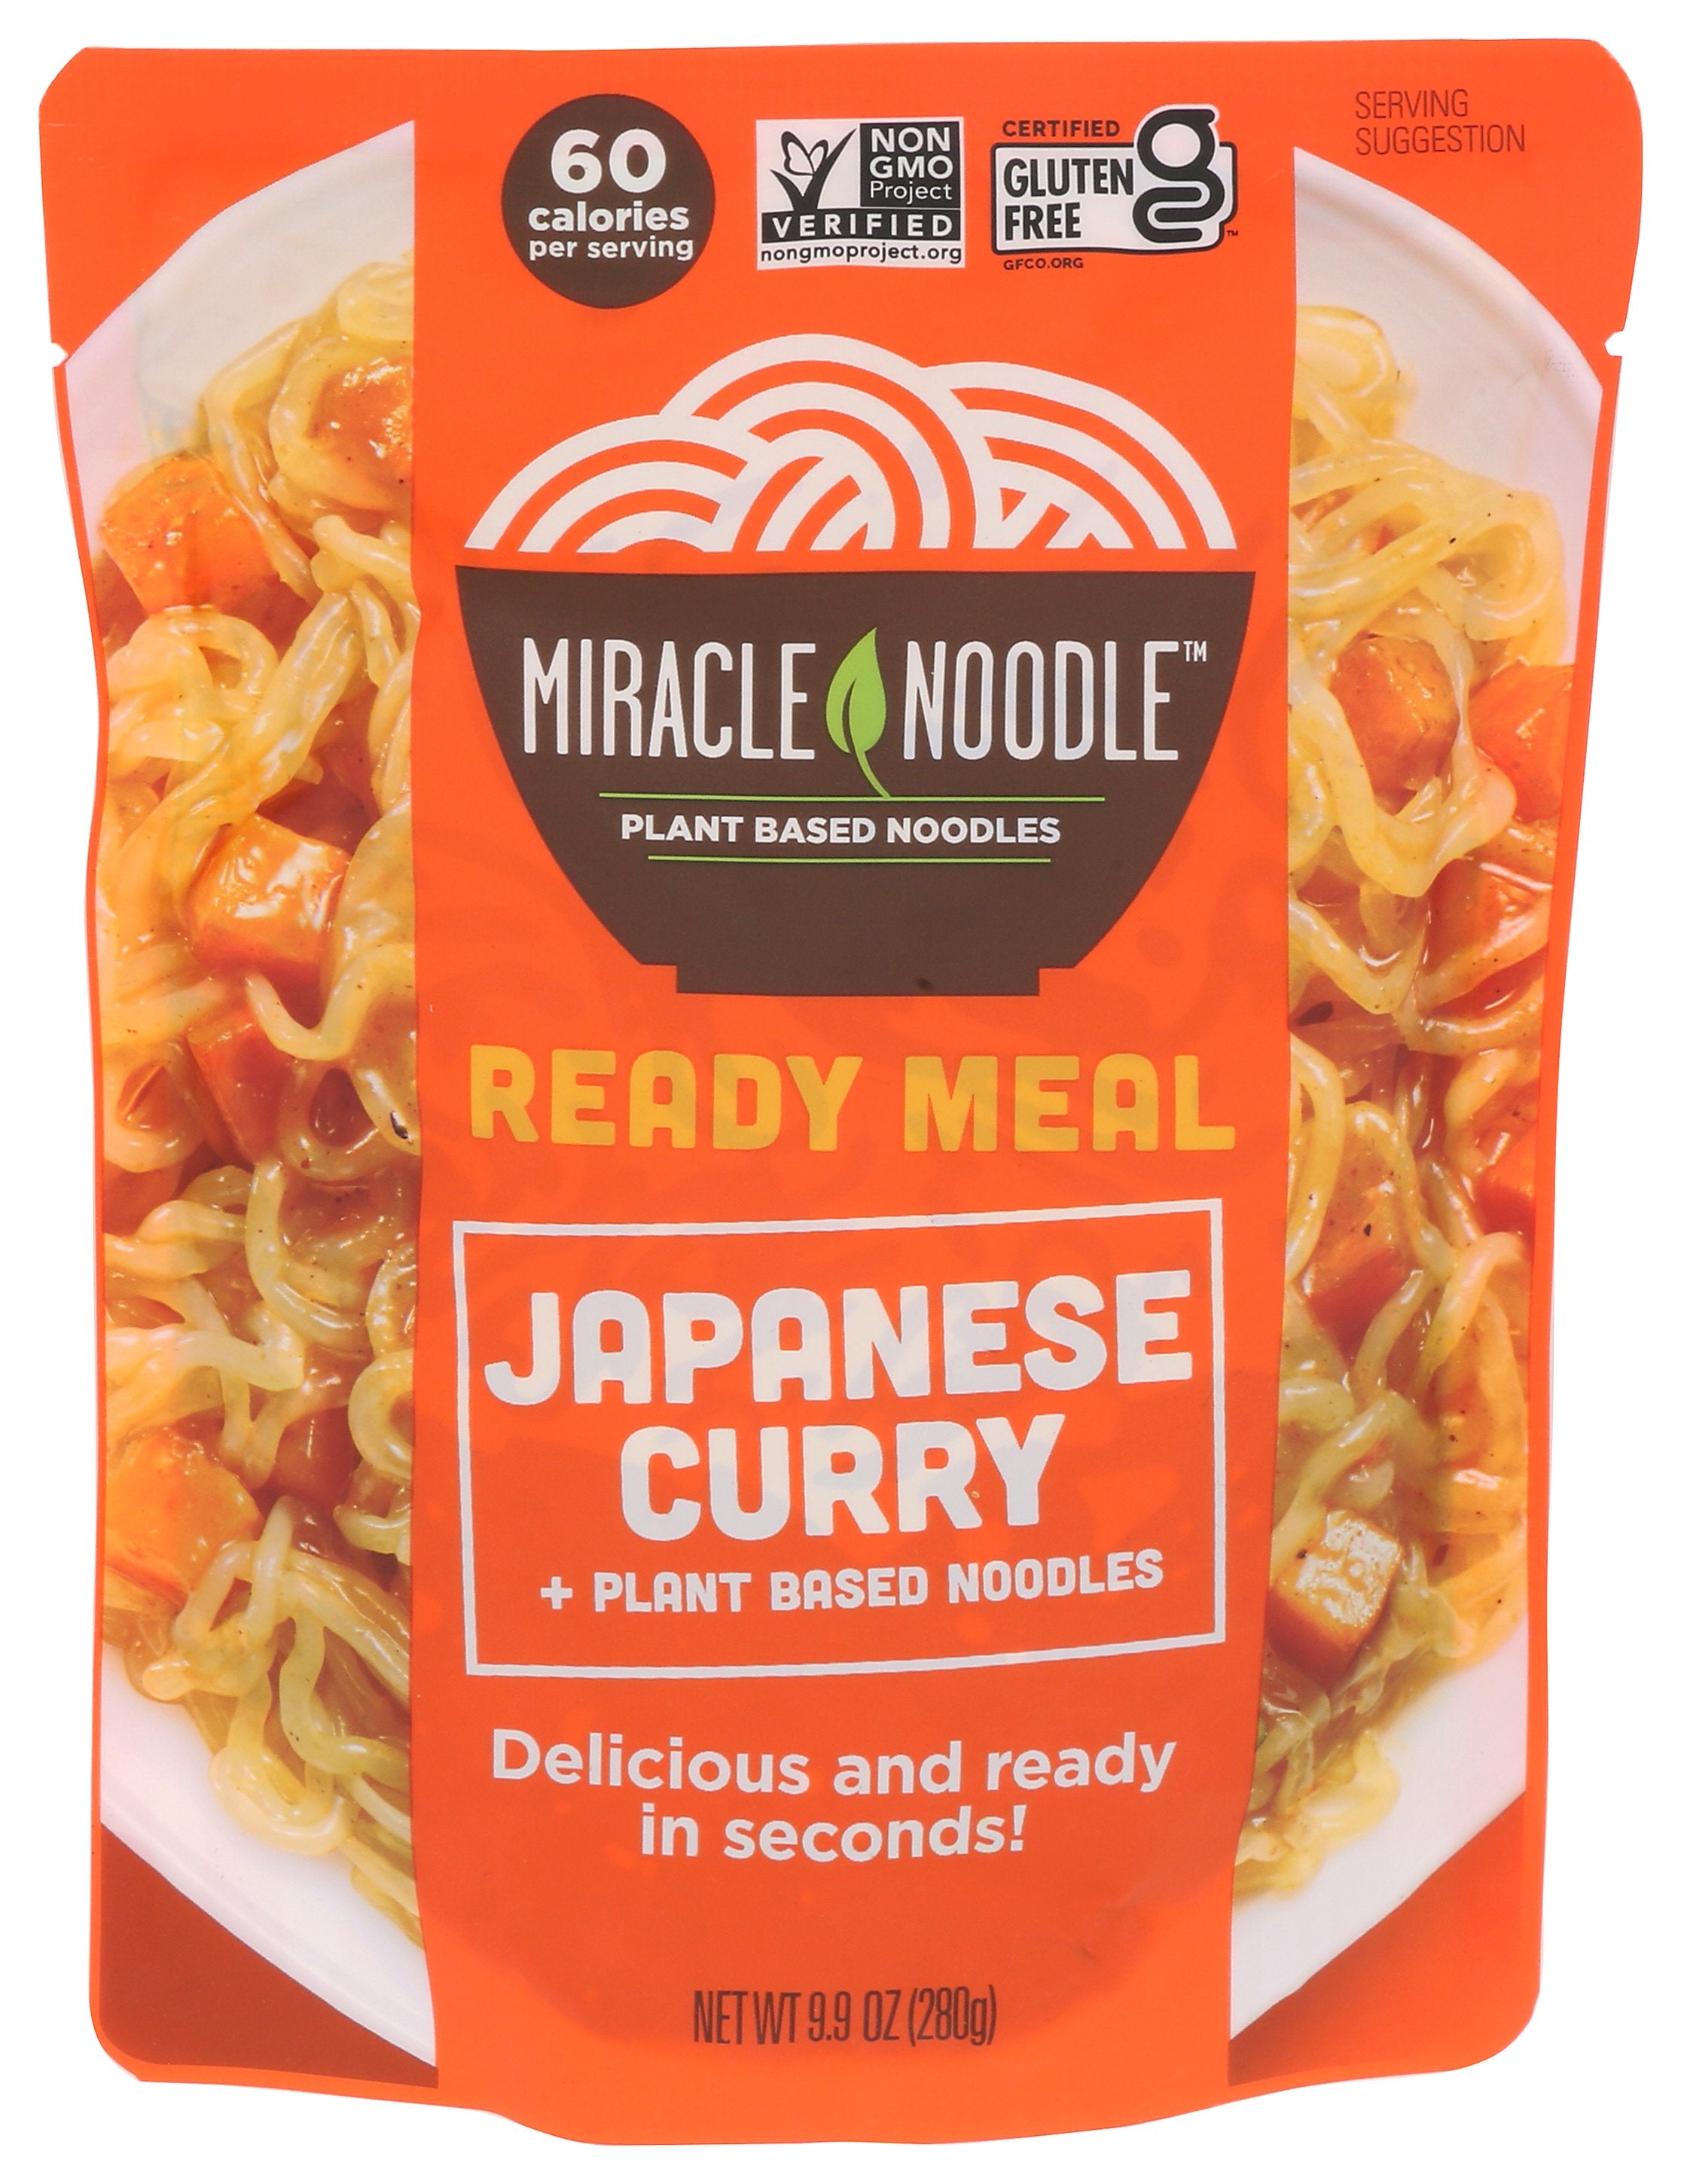 MIRACLE NOODLE RTE MEAL JAPN CURRY NOODL - Case of 6